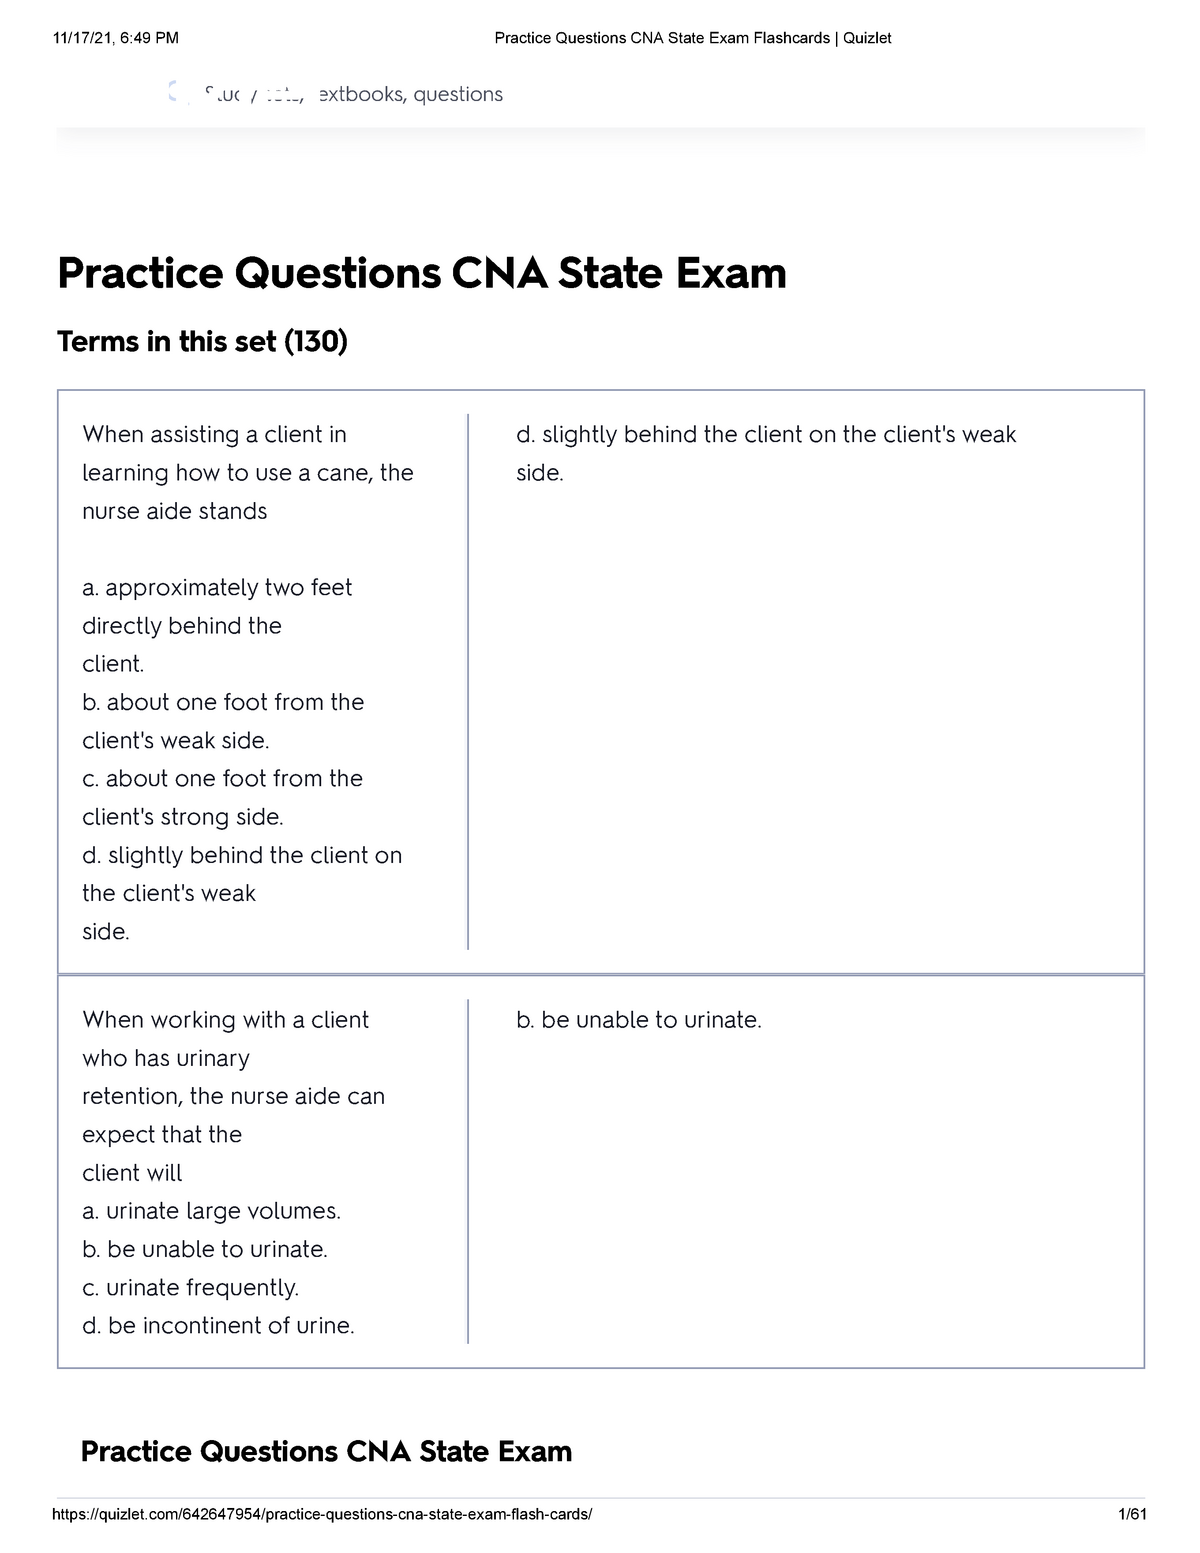 Practice Questions CNA State Exam Flashcards Quizlet Upgrade Practice